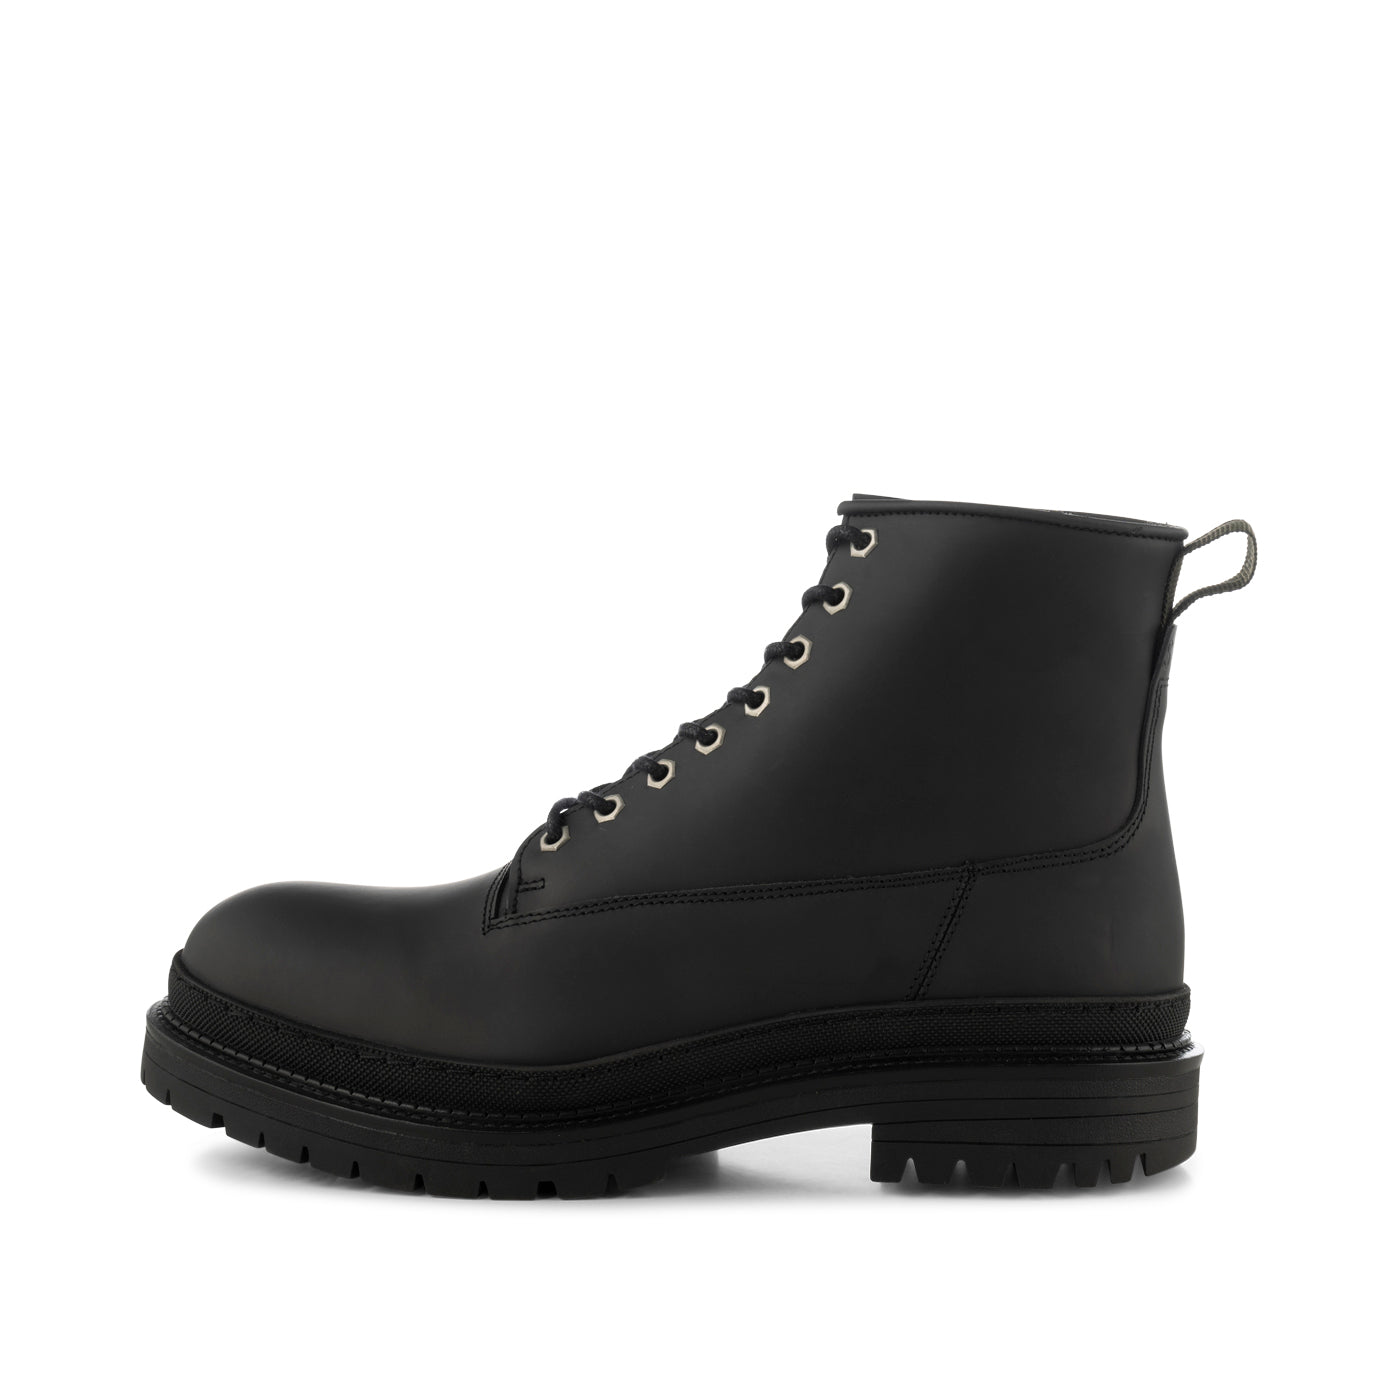 Arvid lace up boot leather warm - BLACK – SHOE THE BEAR - US